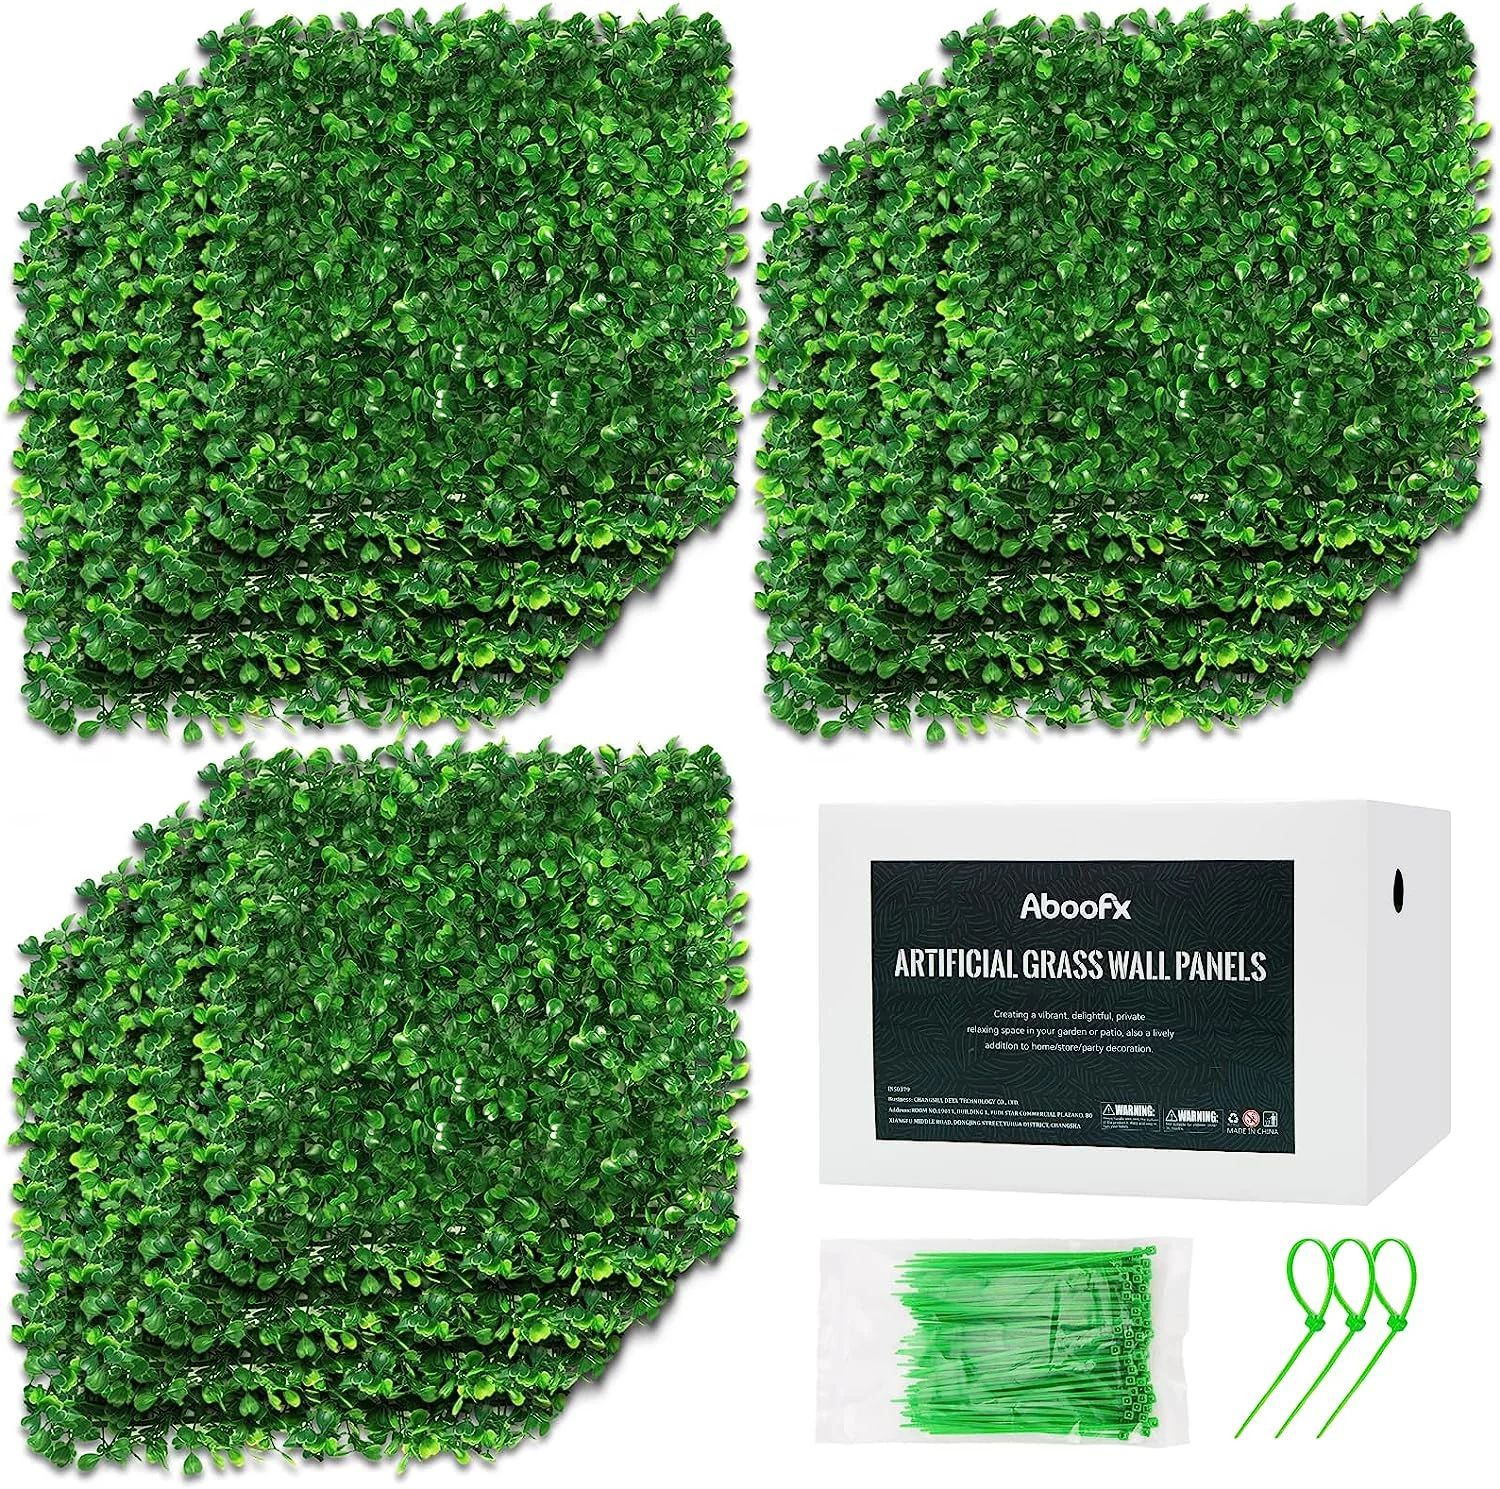 Aboofx Artificial Grass Wall Panels, 12 Pack 10 x 10 inch Boxwood Hedge Wall Panels with 100 Zip ... | Walmart (US)